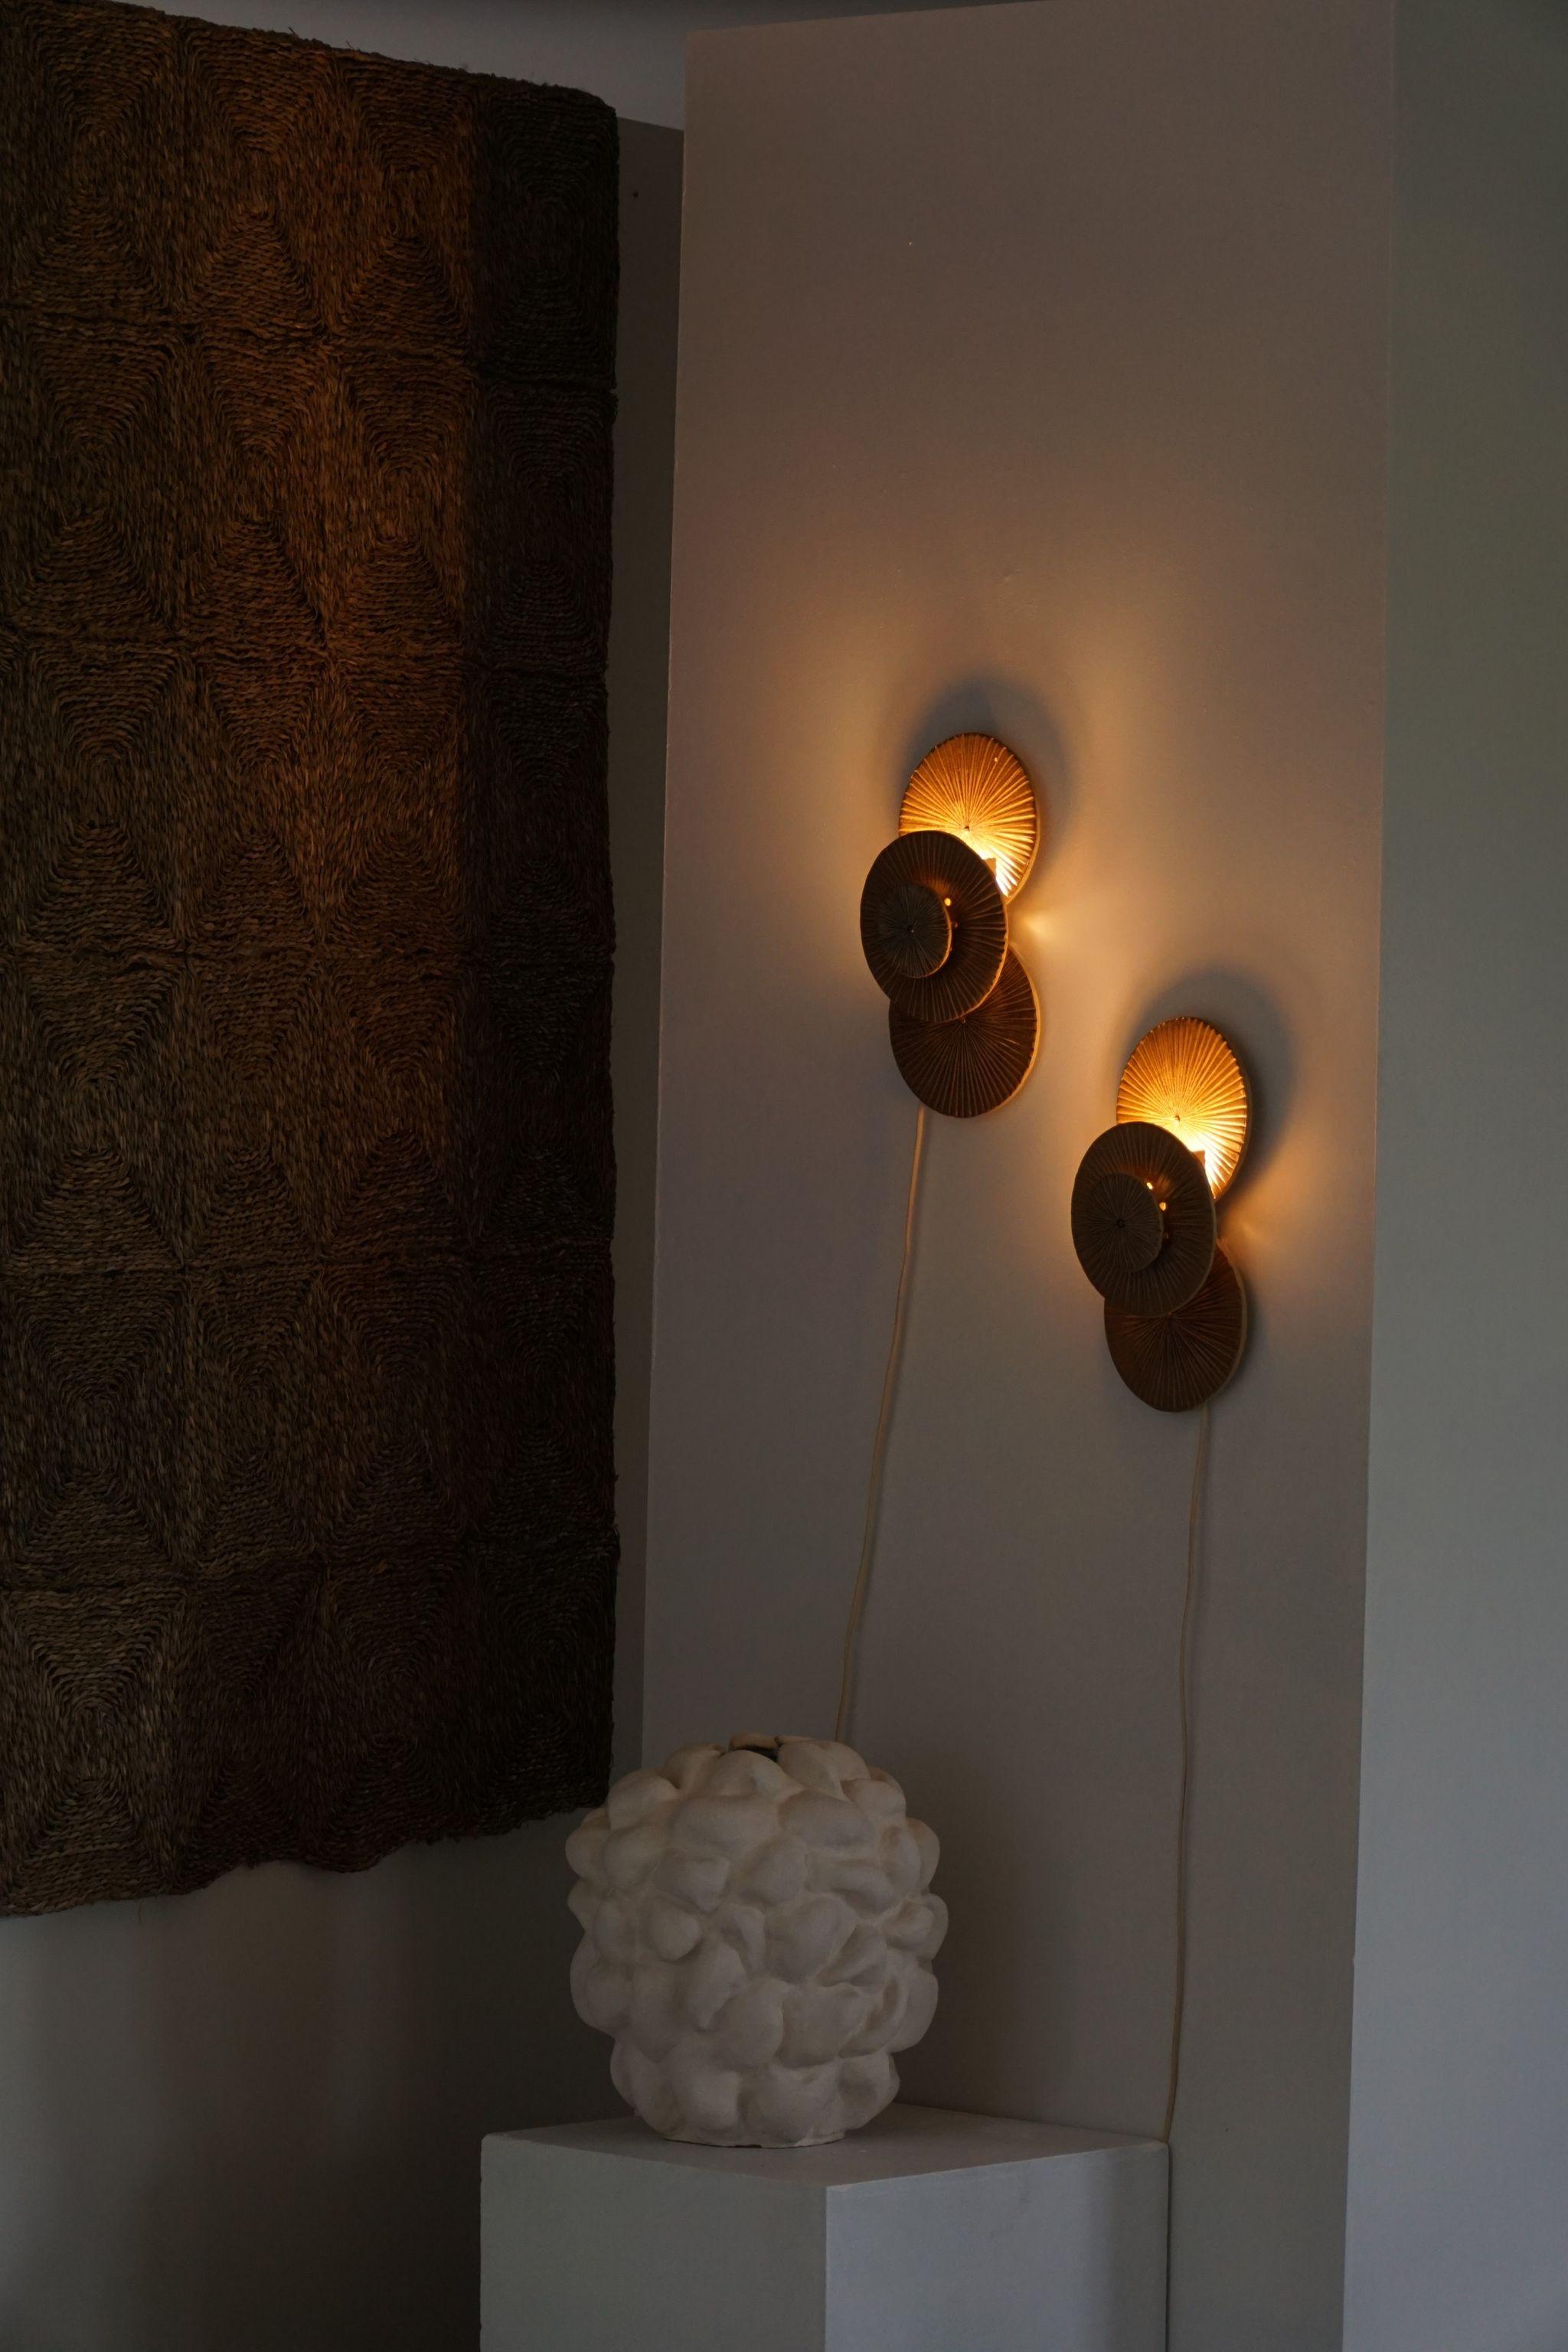 Danish modern pair of ceramic wall lamps from the 1970s, produced by the Danish company Axella. A decorative pair made of ceramic in various shades of brown. 

The pair is in a great vintage condition.

Other honorable mentions from this Danish